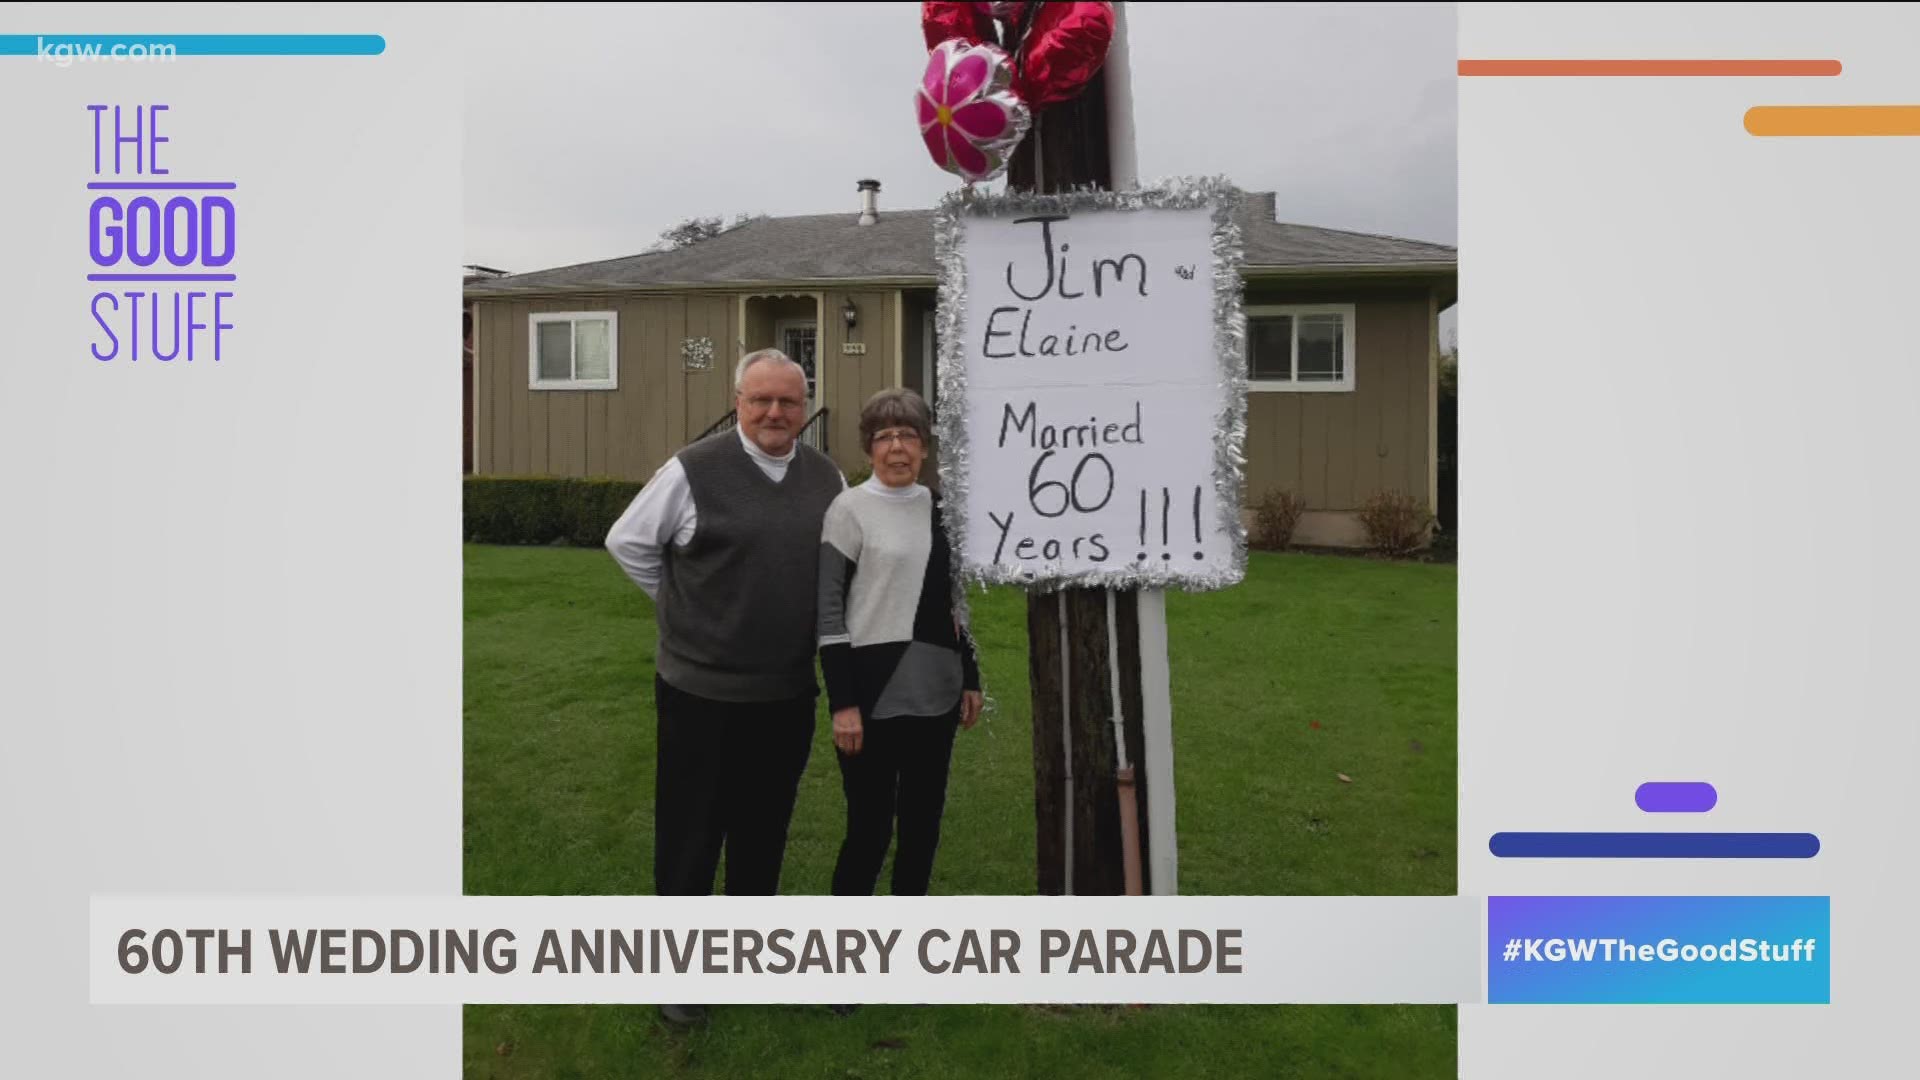 Jim and Elaine Blair of Woodland, Wa., celebrated their 60th wedding anniversary on Nov. 22. The couple's friends from church organized a car parade for them.